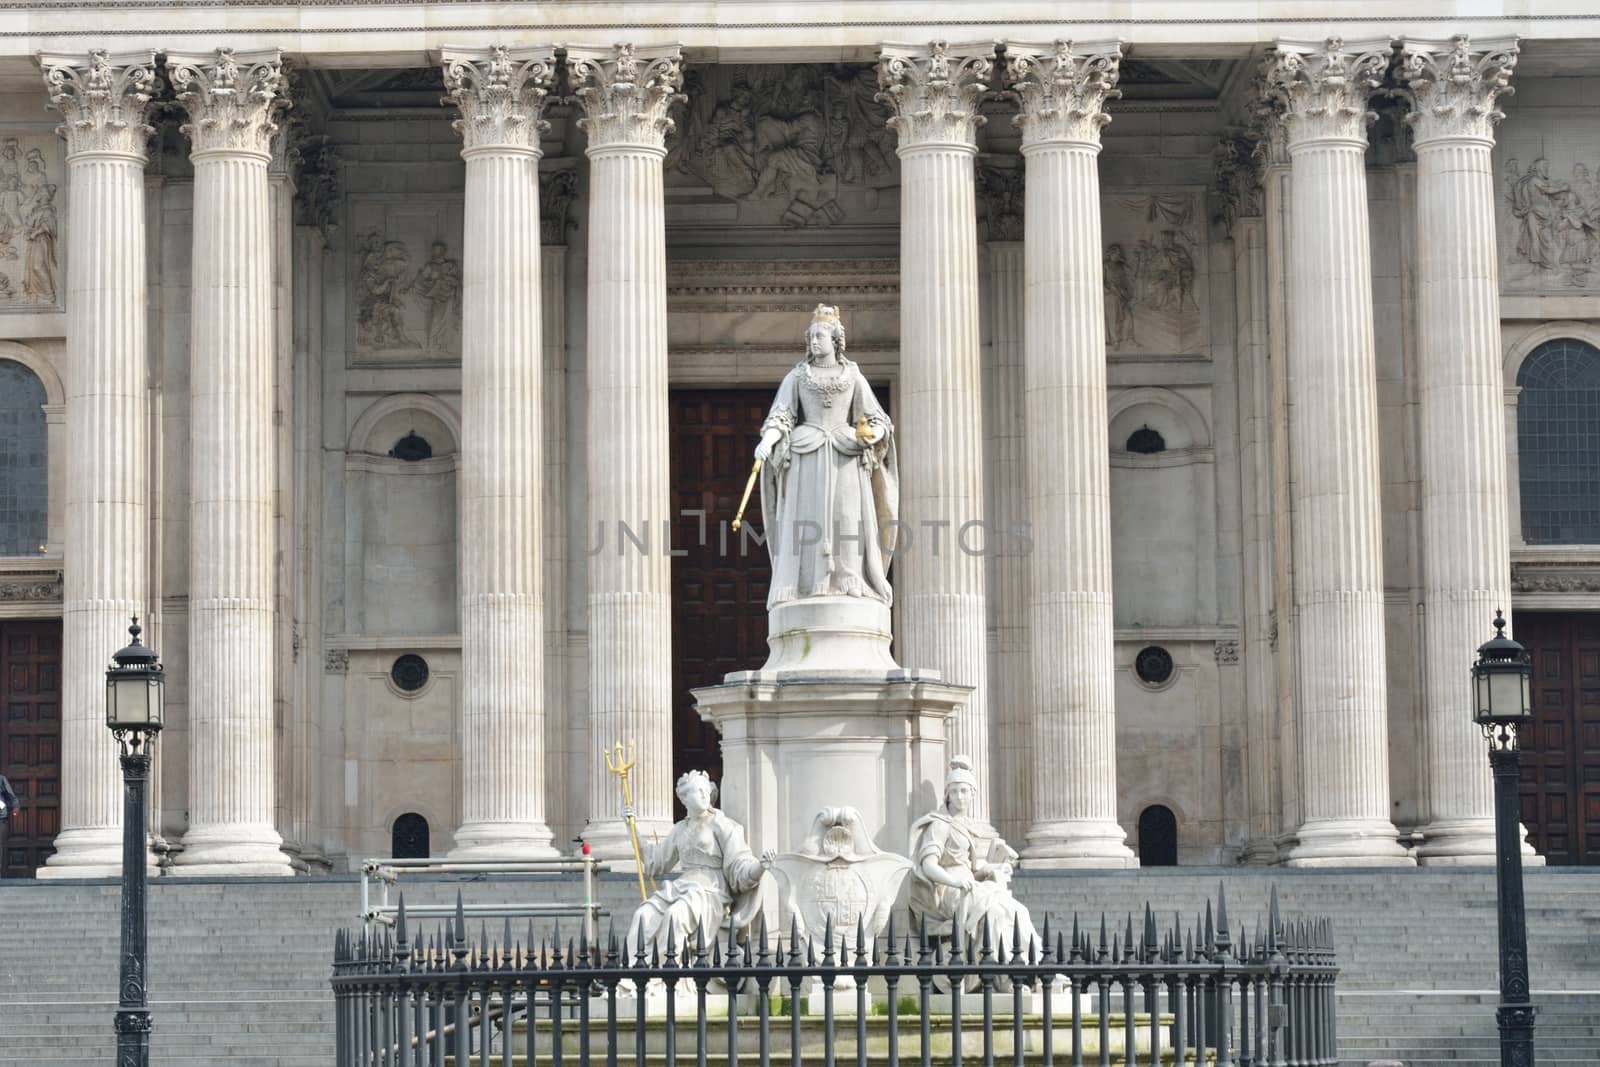 Statue of Queen Victoria in front of St Pauls with columns behind